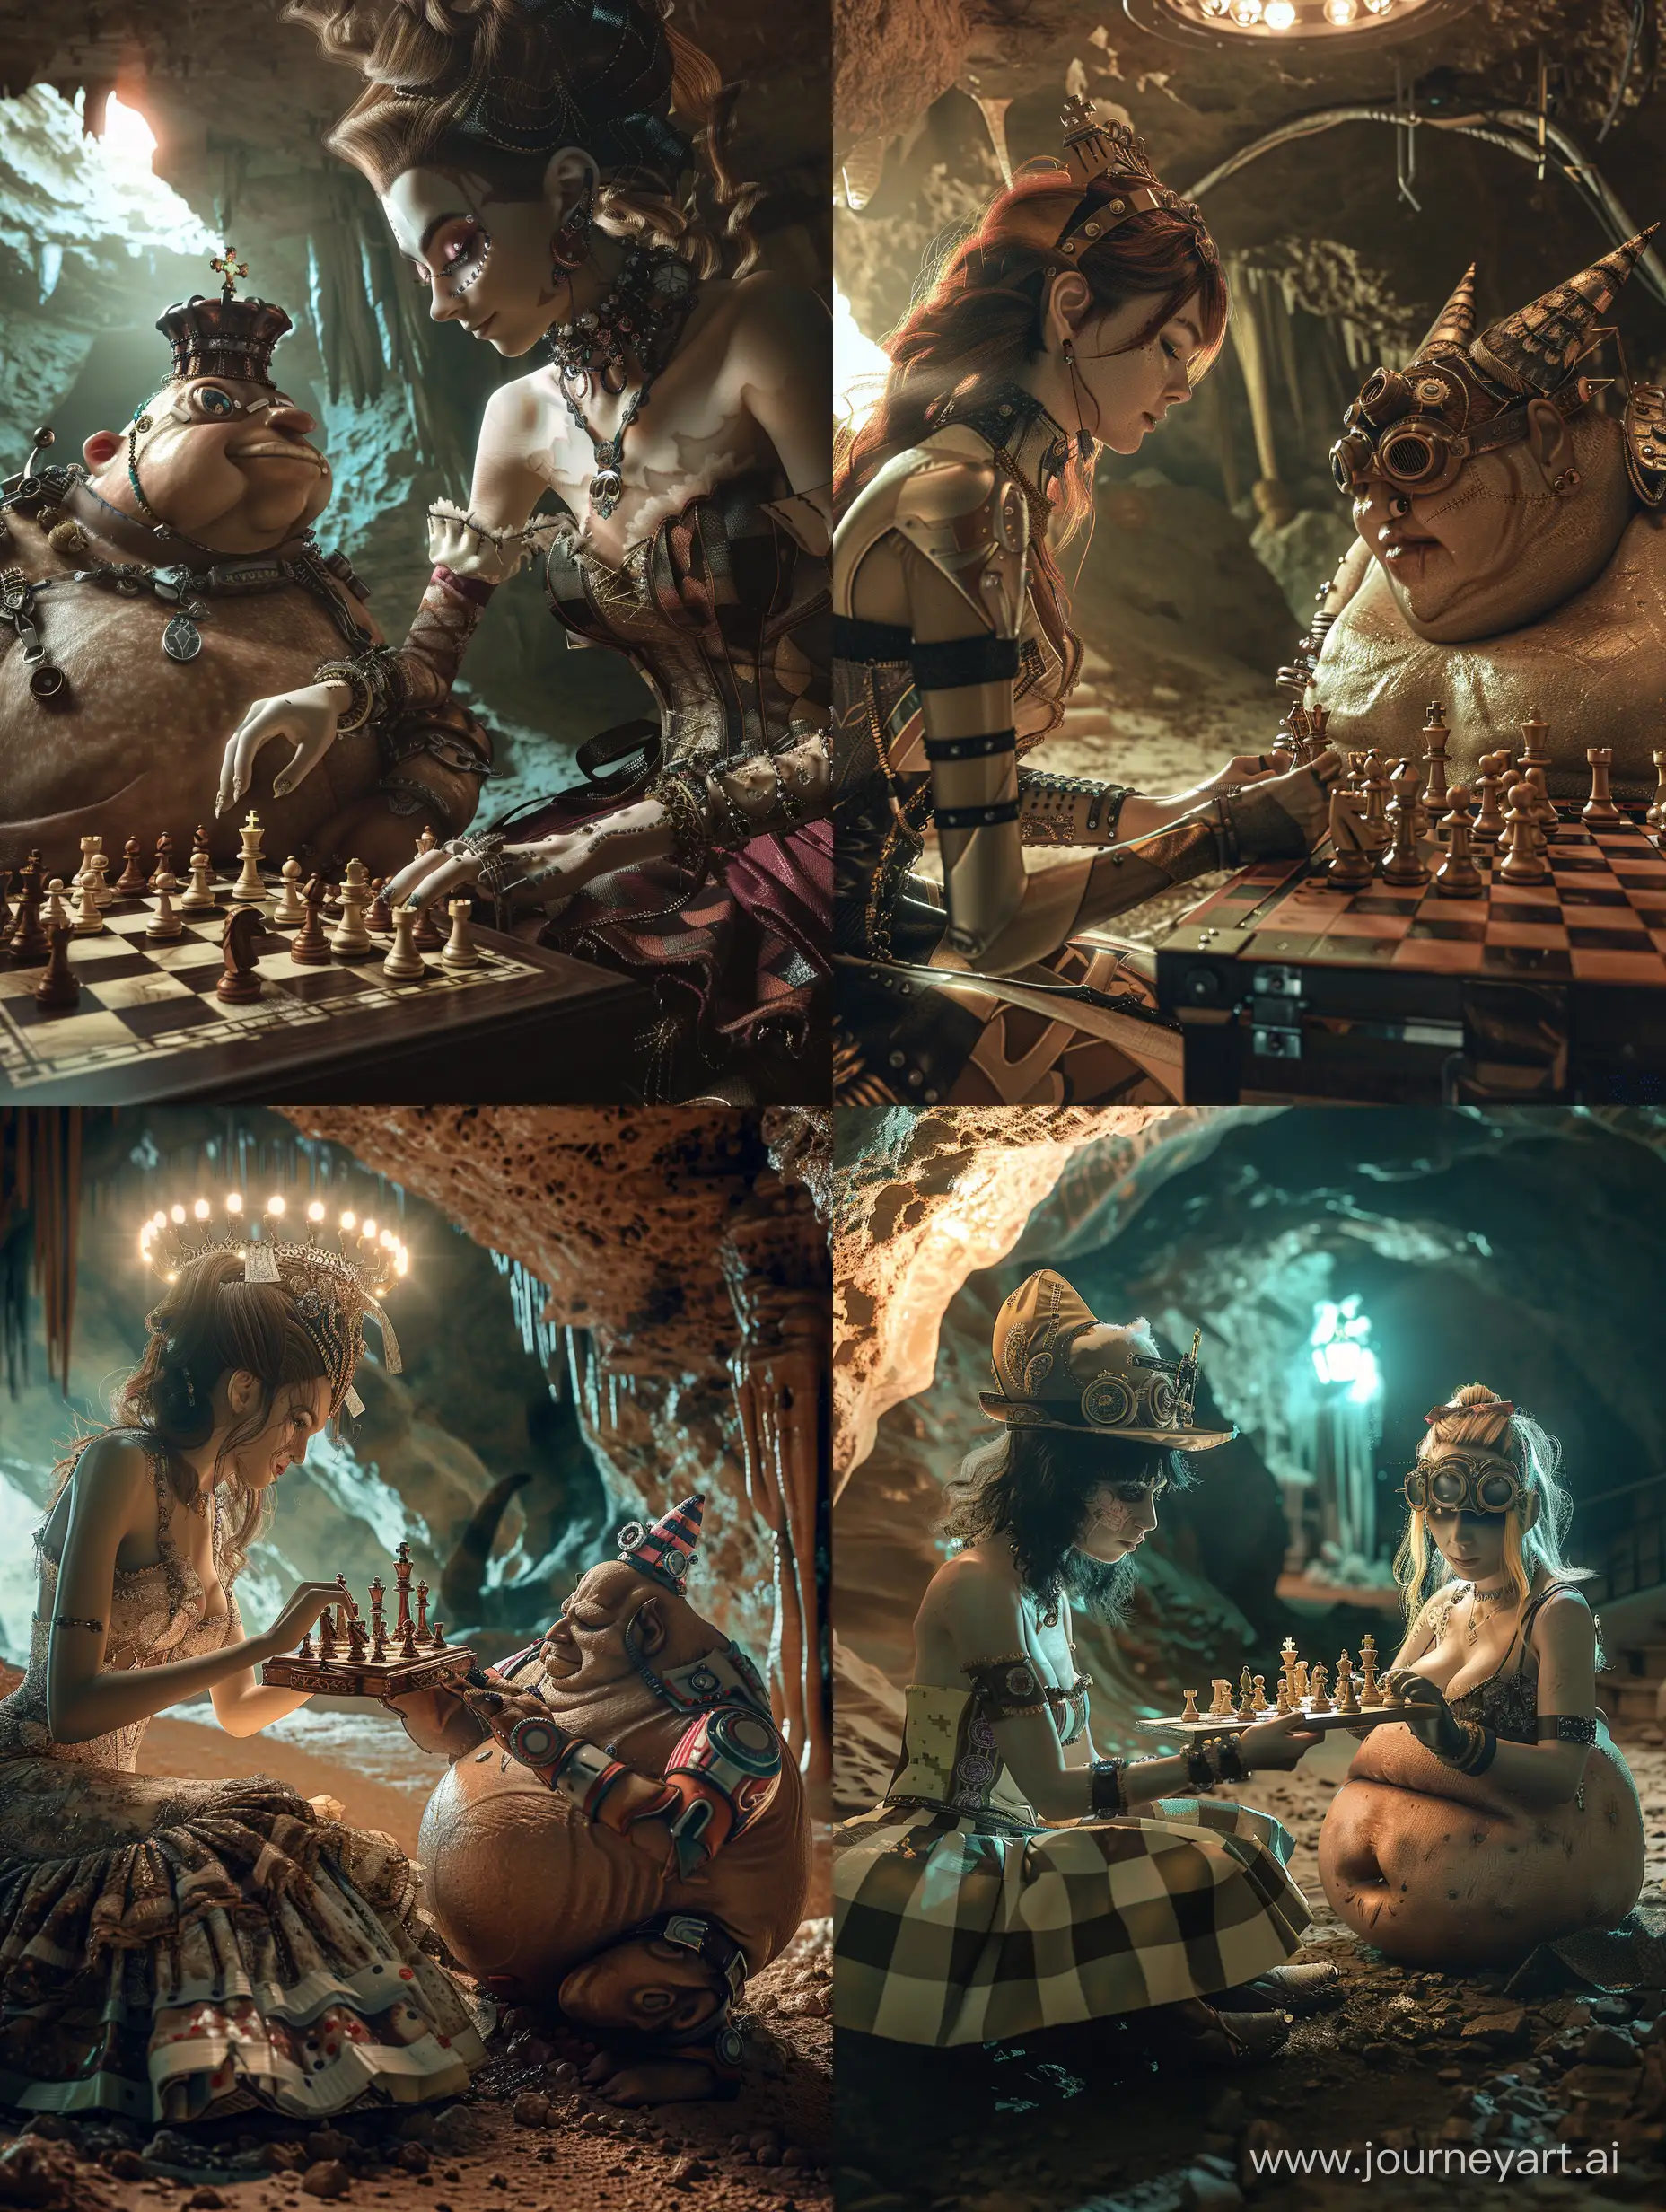 Steampunk-Magic-Spanish-Cabaret-Dancer-Plays-Chess-with-Funny-Humanoid-Creature-in-Cave-Glow